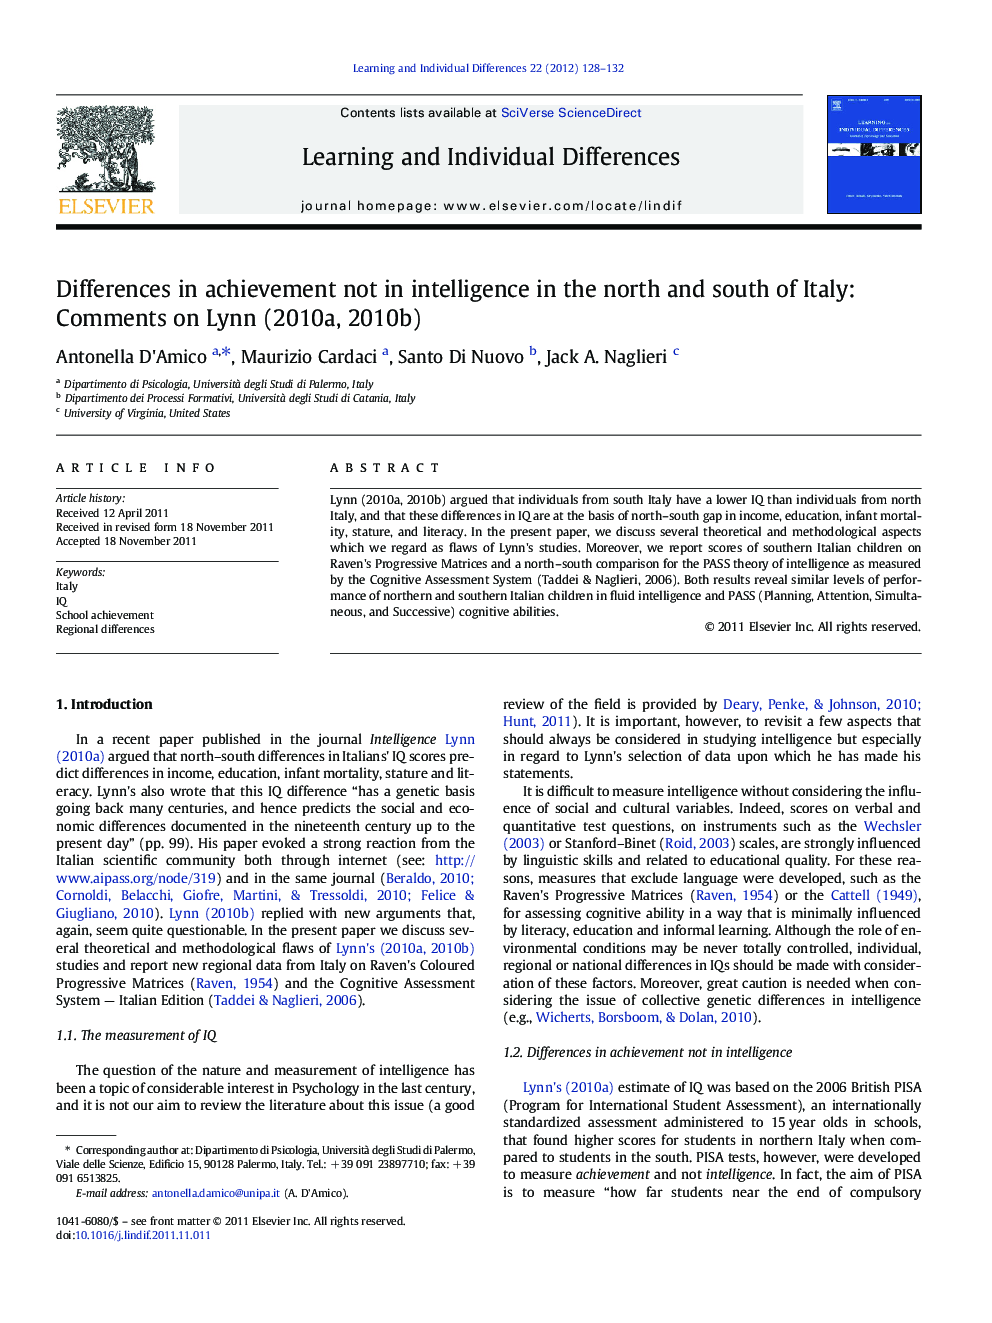 Differences in achievement not in intelligence in the north and south of Italy: Comments on Lynn, 2010a and Lynn, 2010b